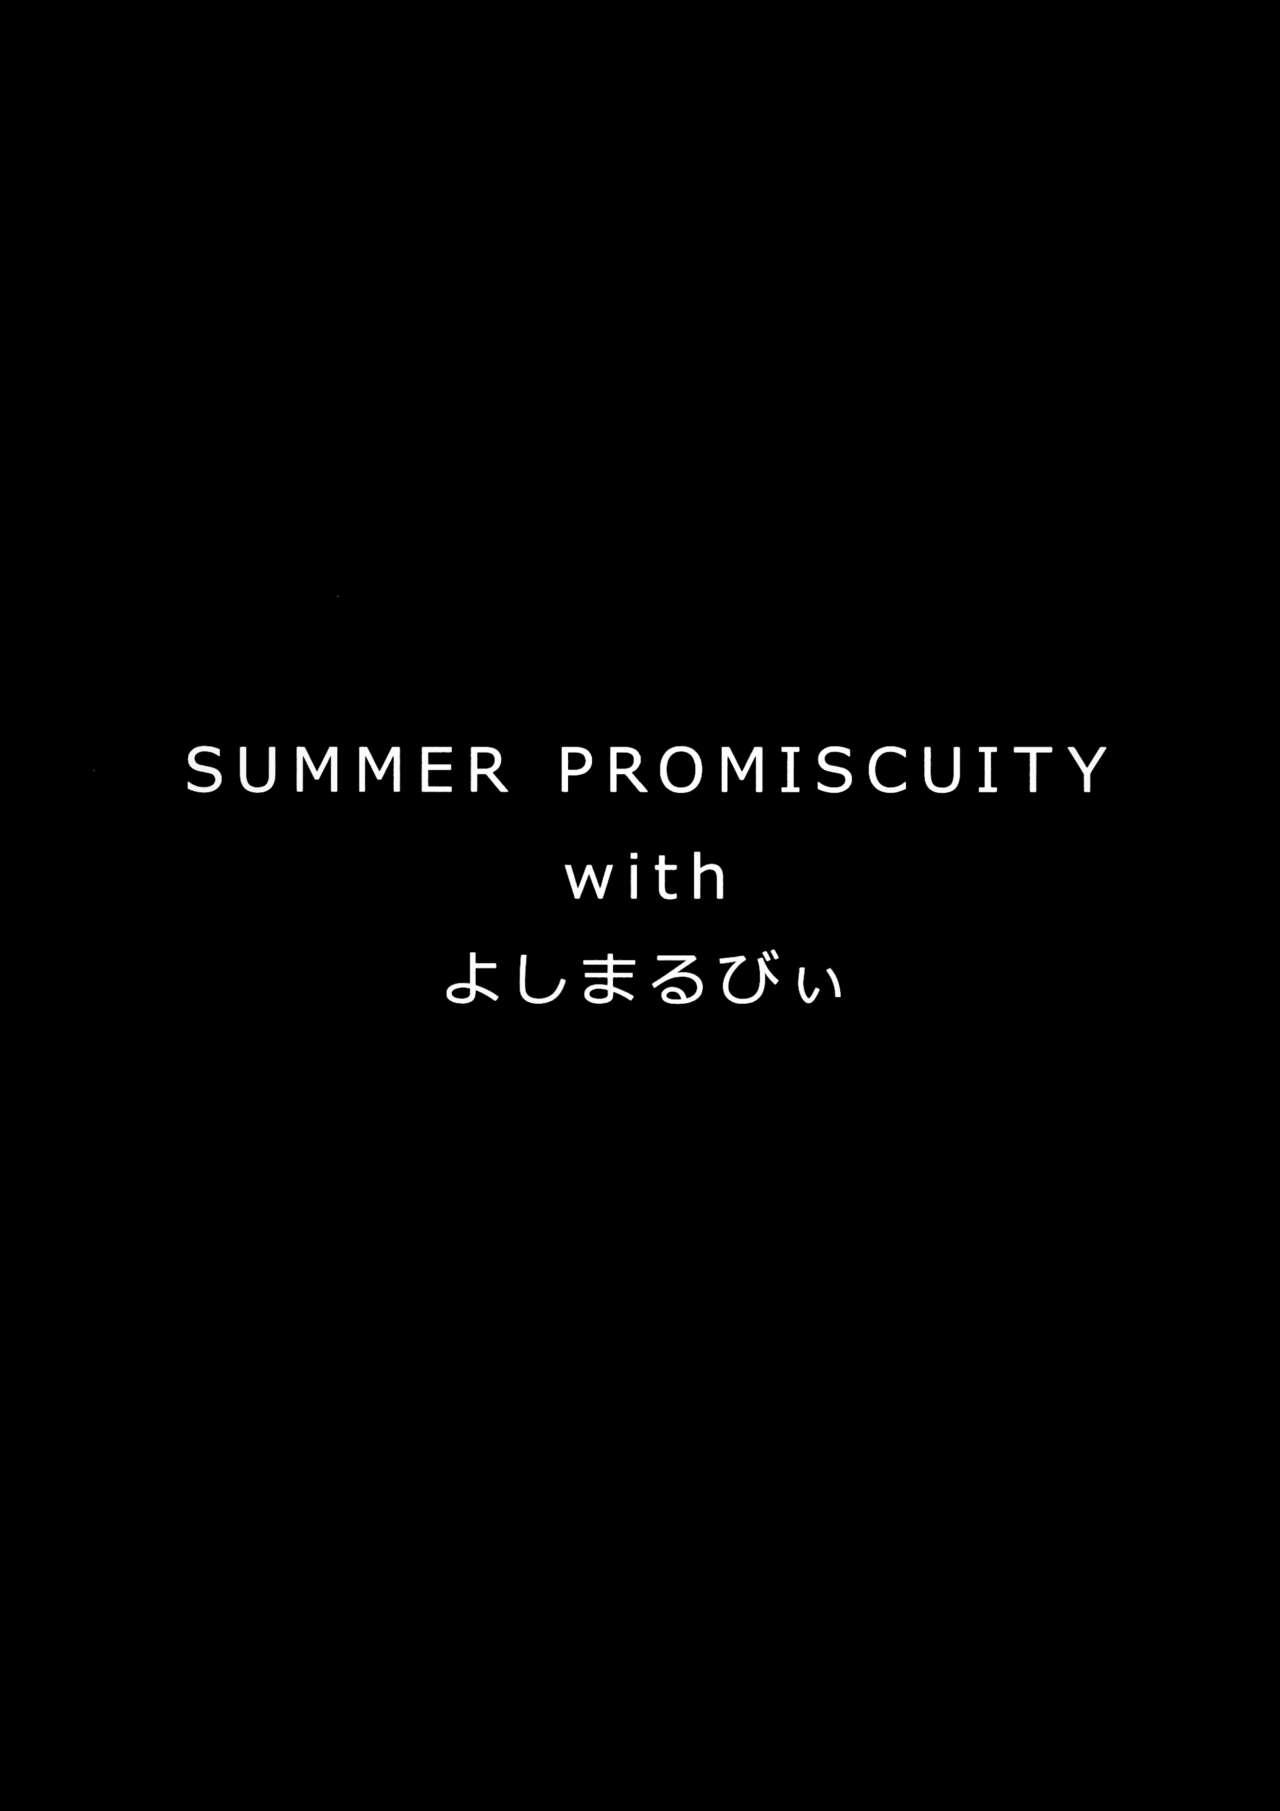 SUMMER PROMISCUITY with Yoshimaruby 2